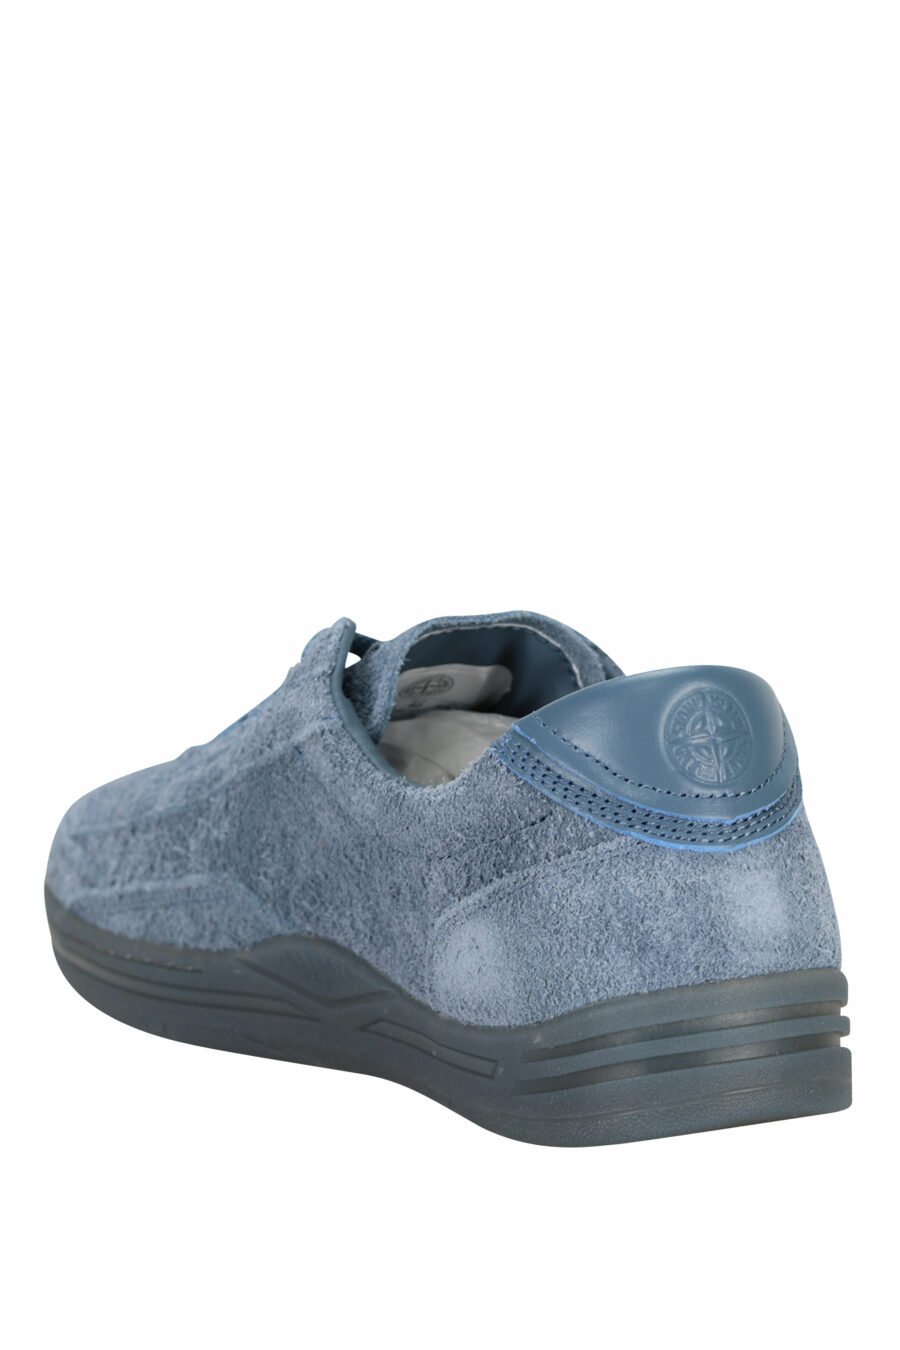 Dark blue trainers with minilogo and grey sole - 8052572937866 3